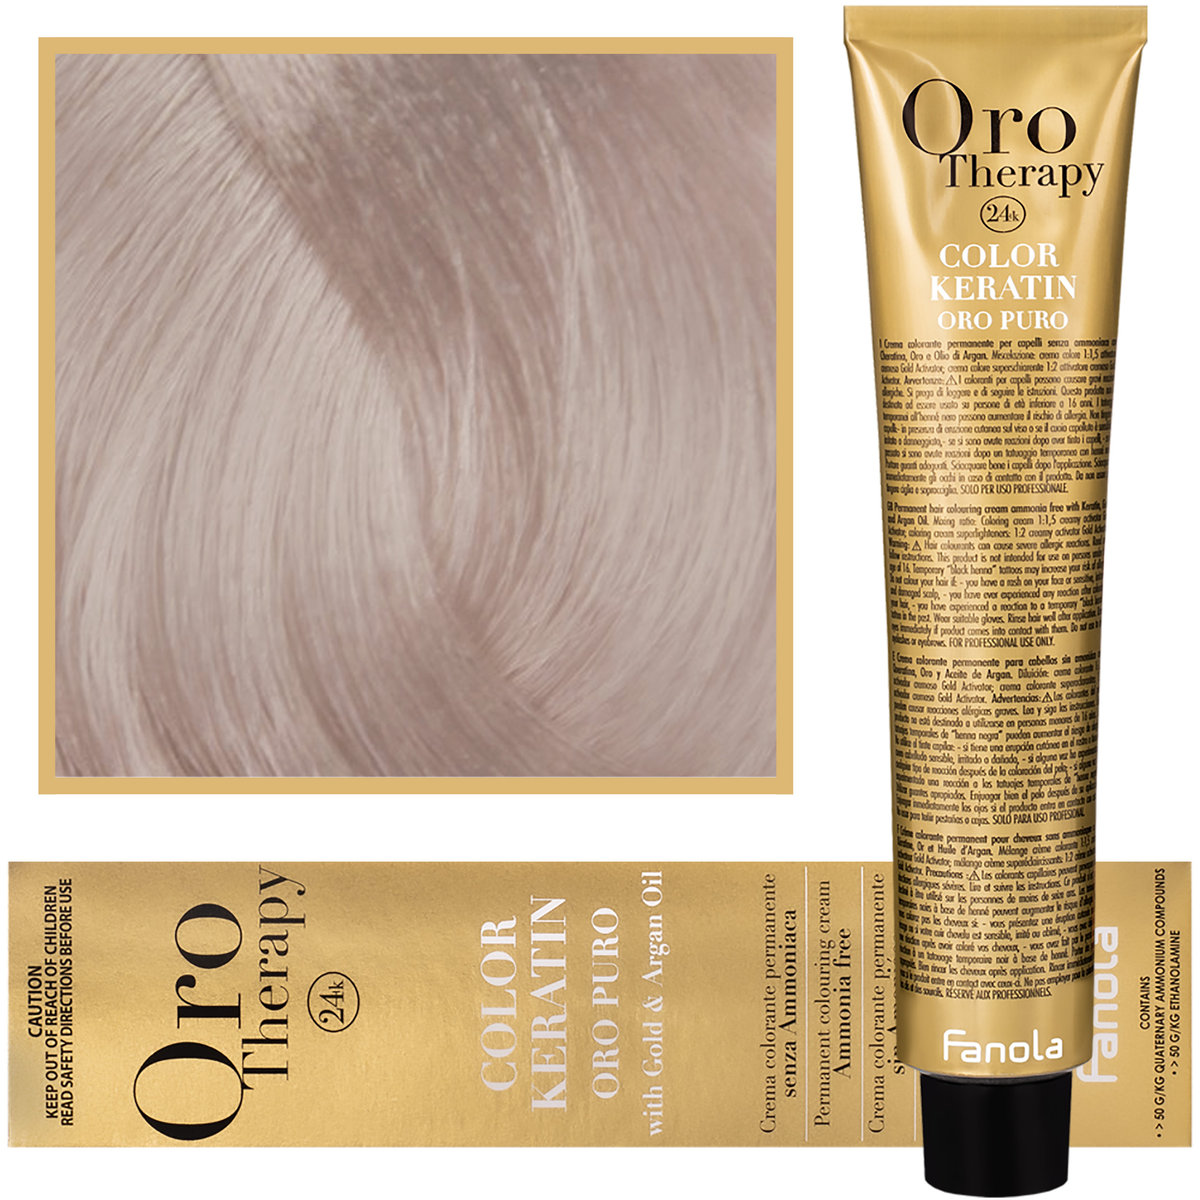 Fanola 10.13 Extra Oro Puro Therapy Keratin Color 100 ML blond Platyna beżowy Extra HC-18-56